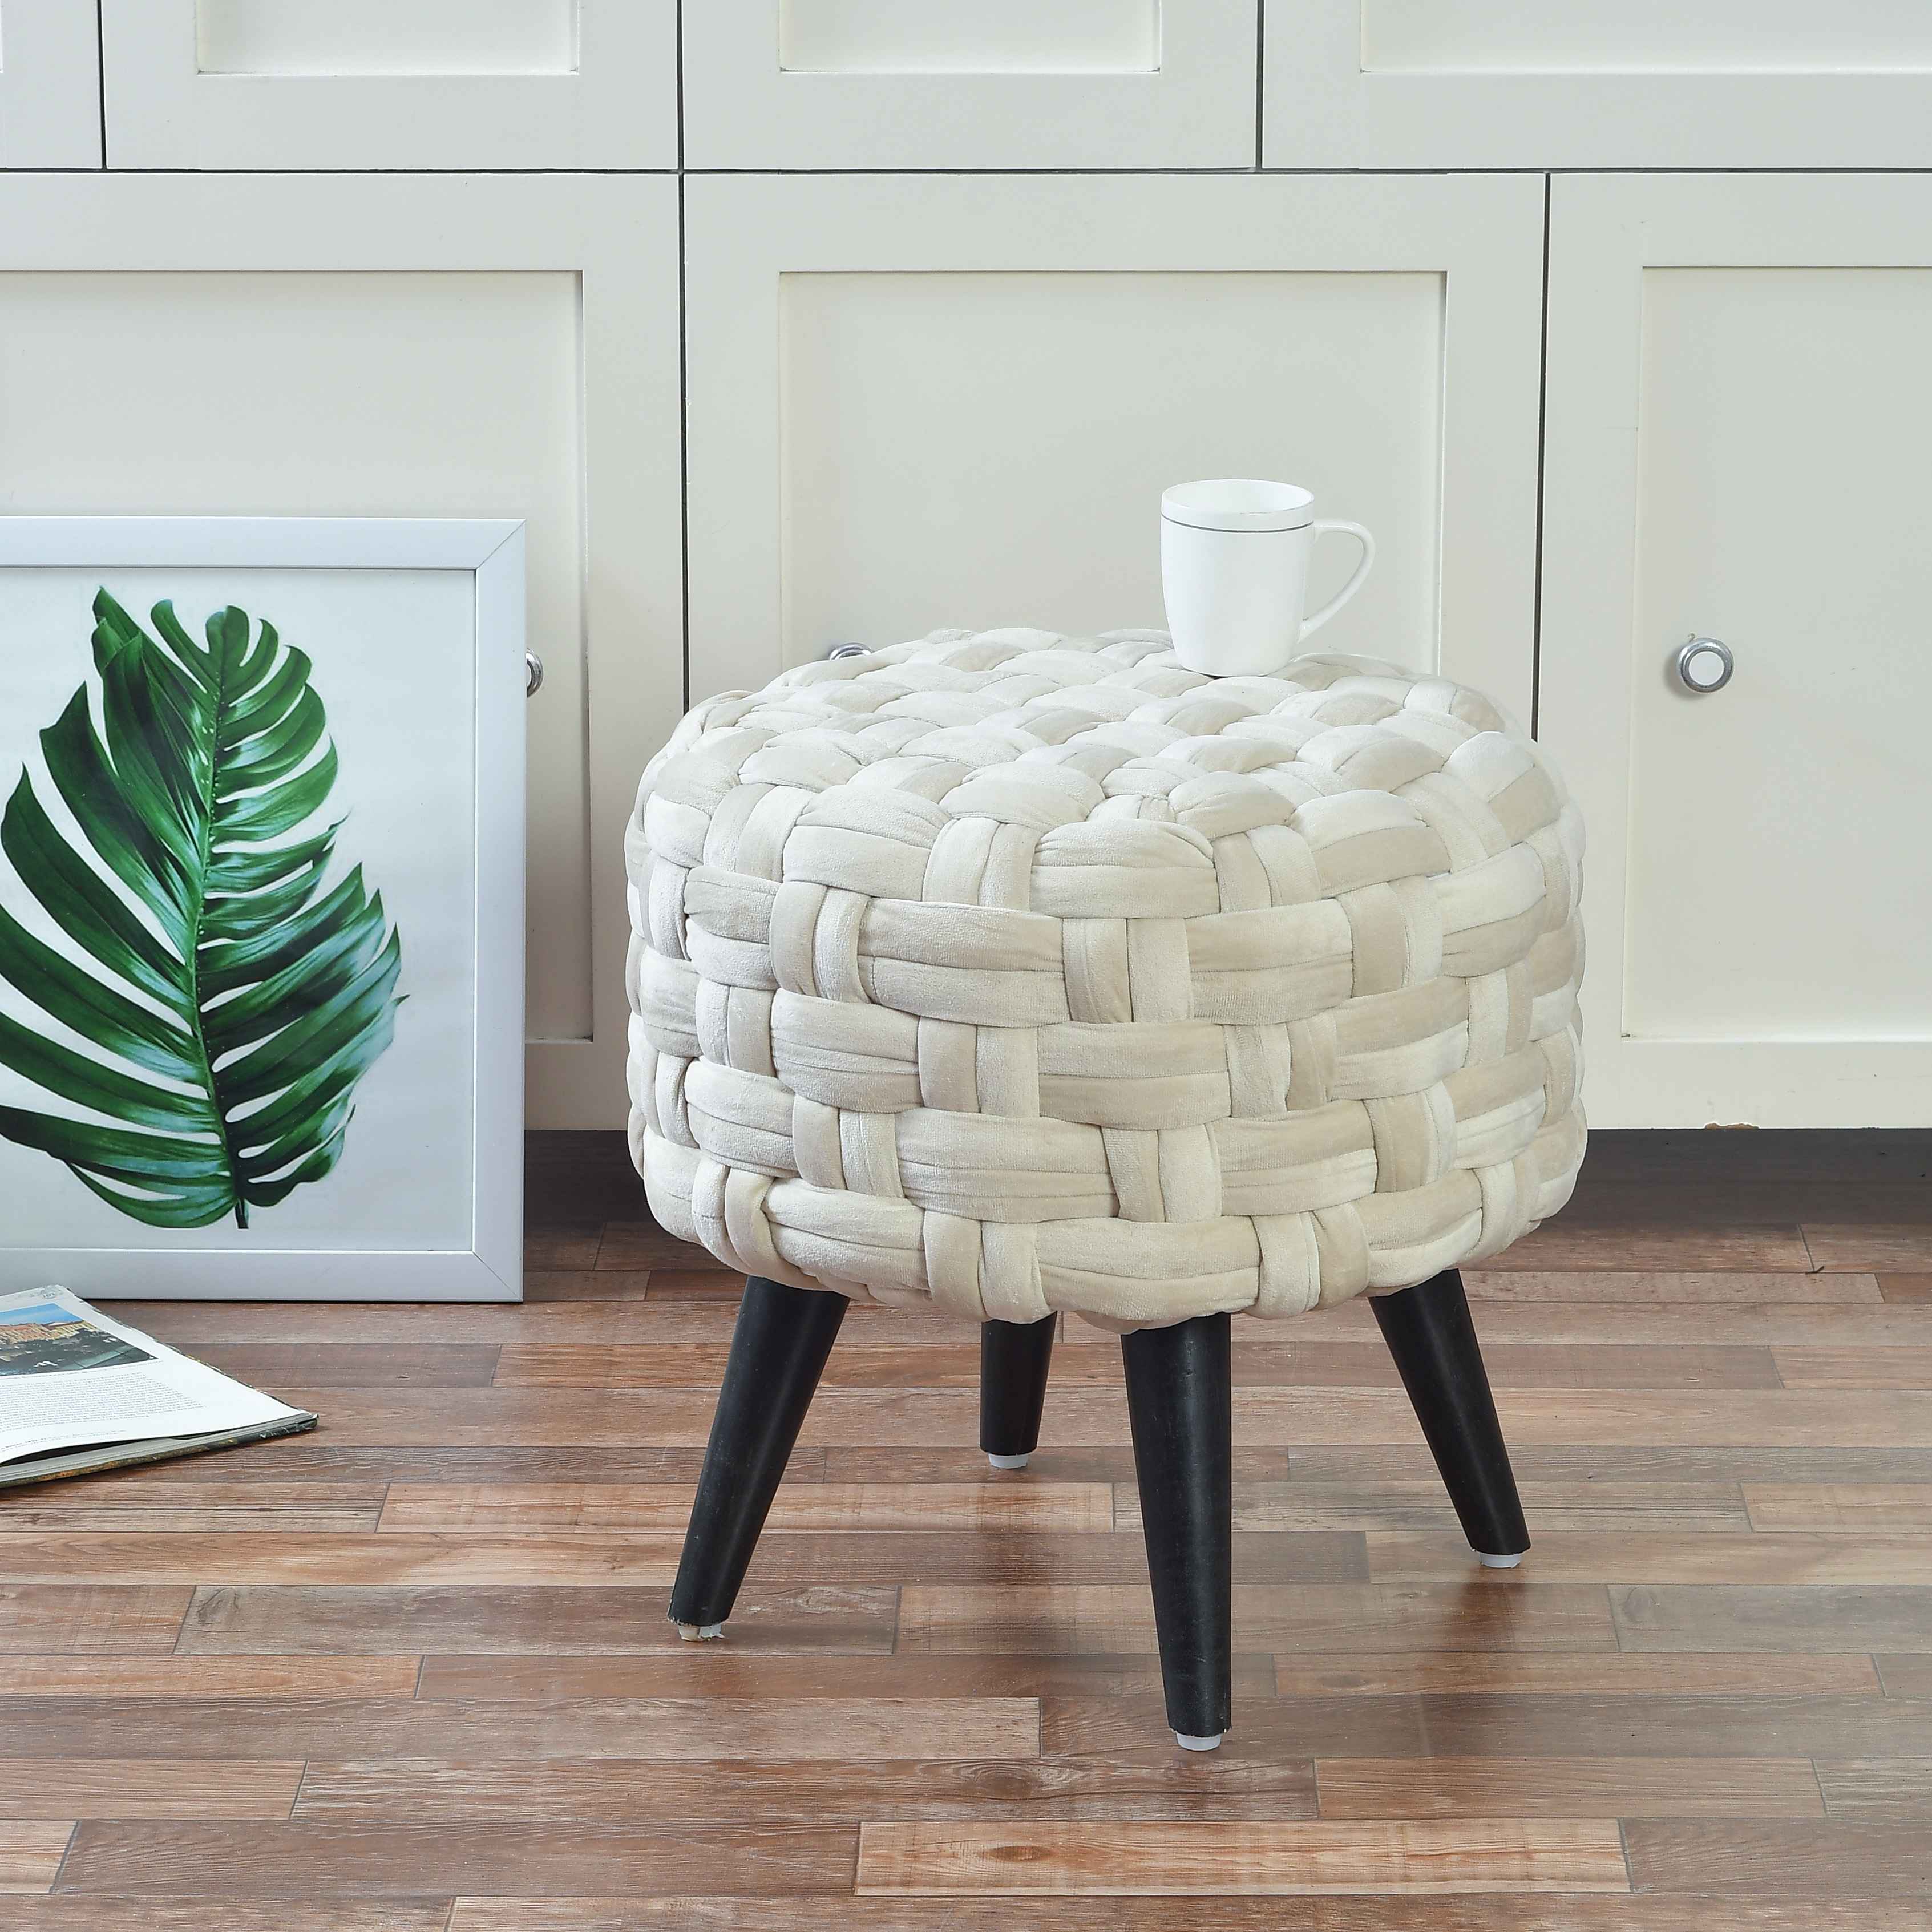 Patterned Paragon Ottomans 25